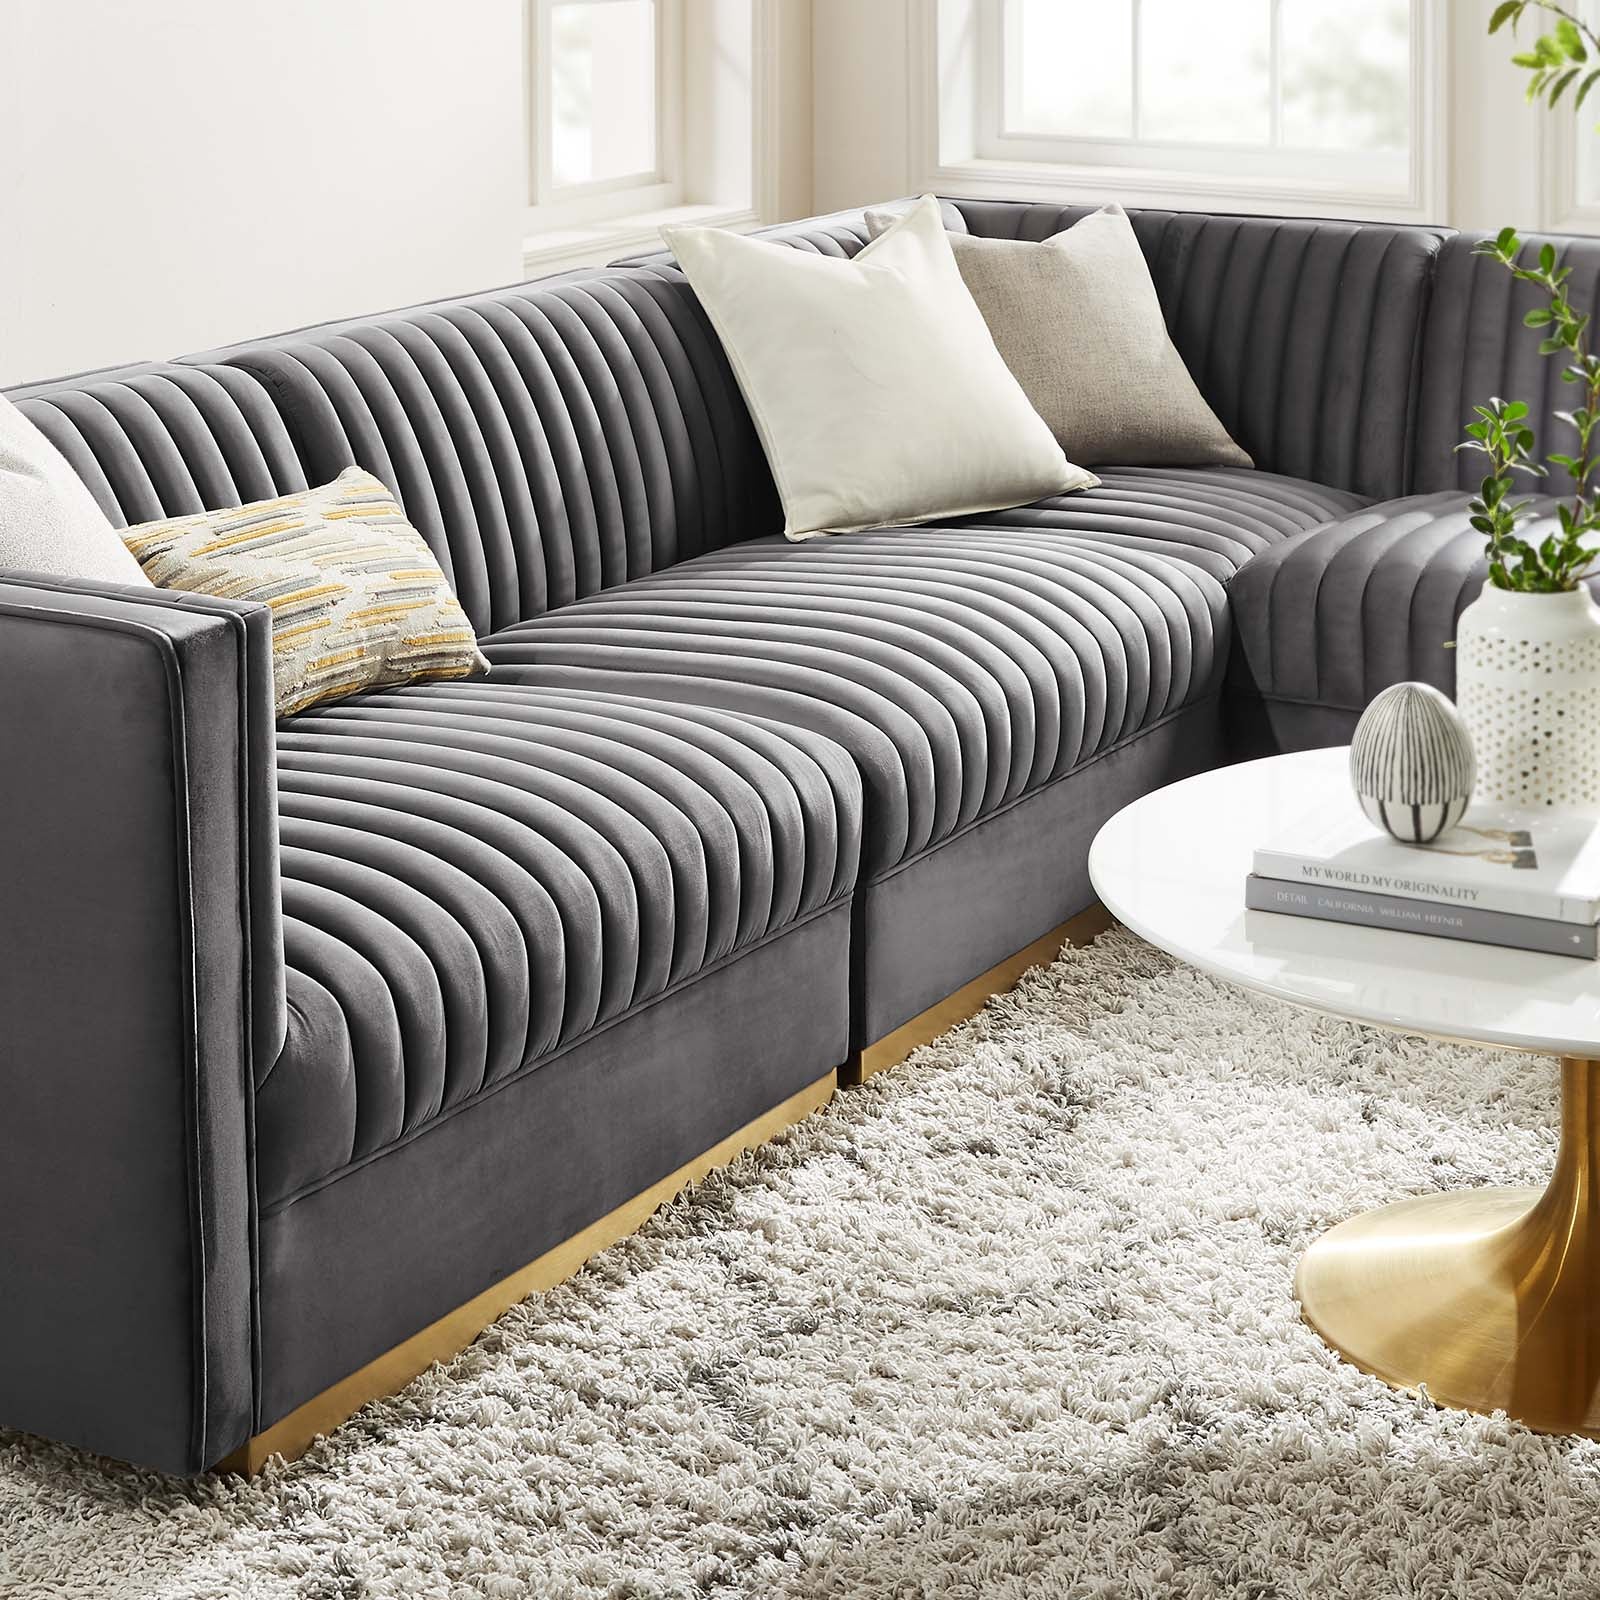 Modway Sectional Sofas - Sanguine Channel Tufted Performance Velvet 4 Piece Right-Facing Modular Sectional Sofa Gray